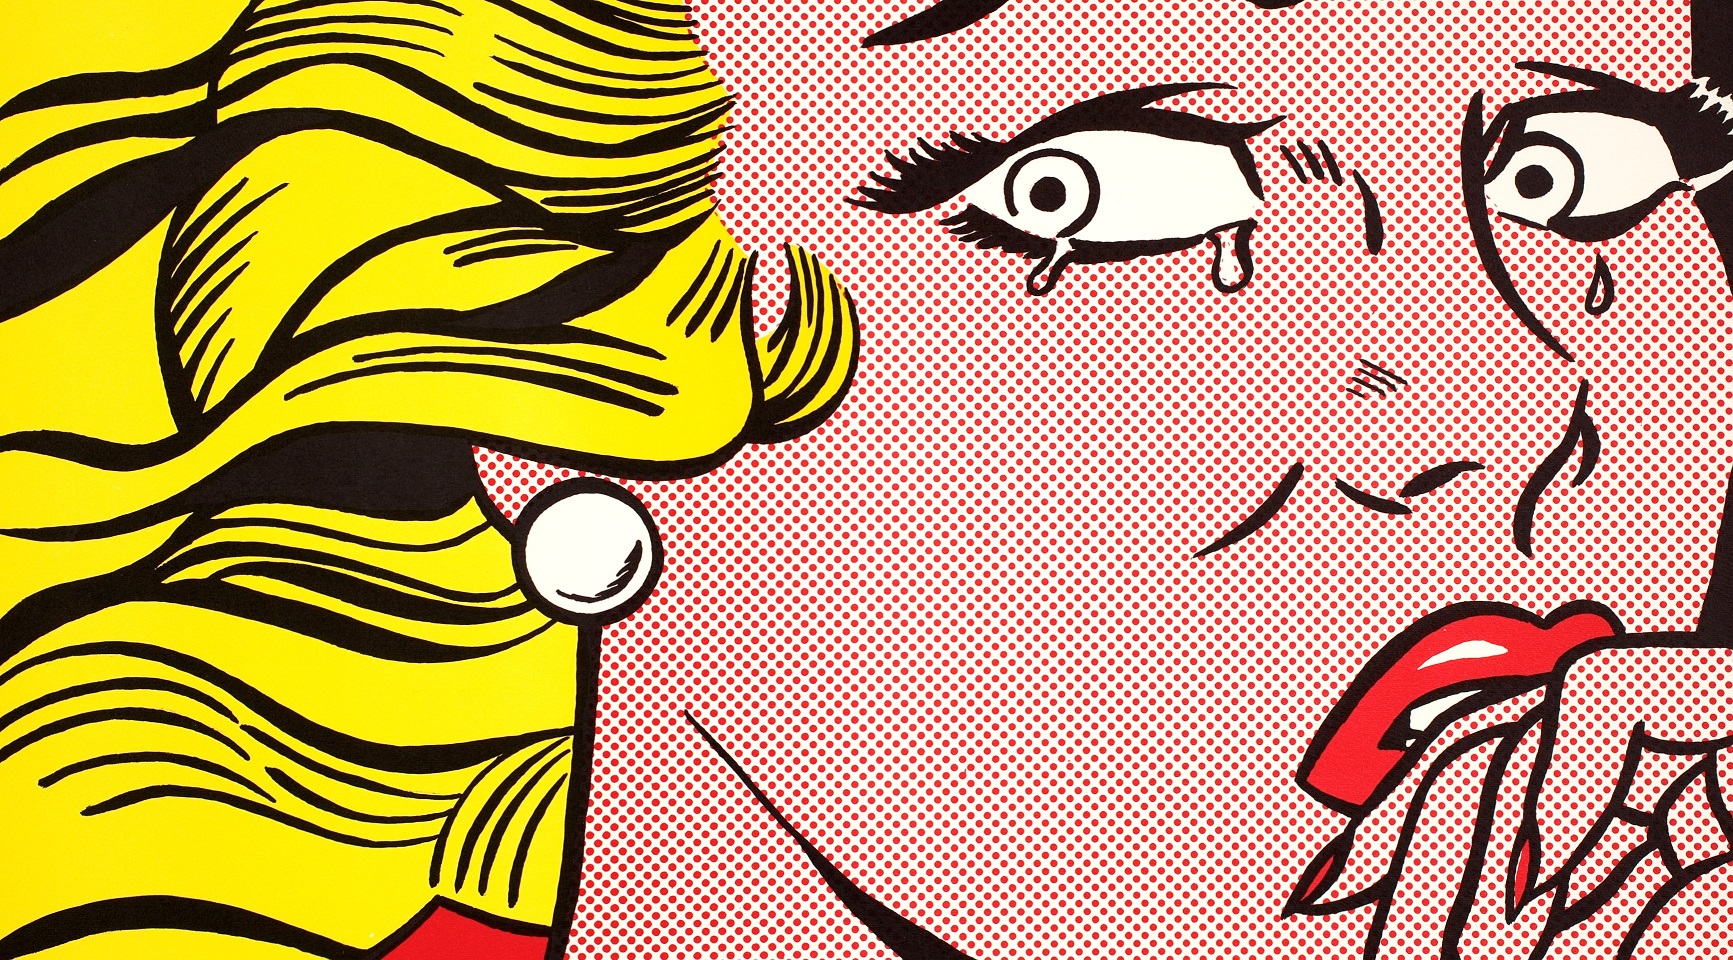 The illustration "Crying Girl" by Roy Lichtenstein